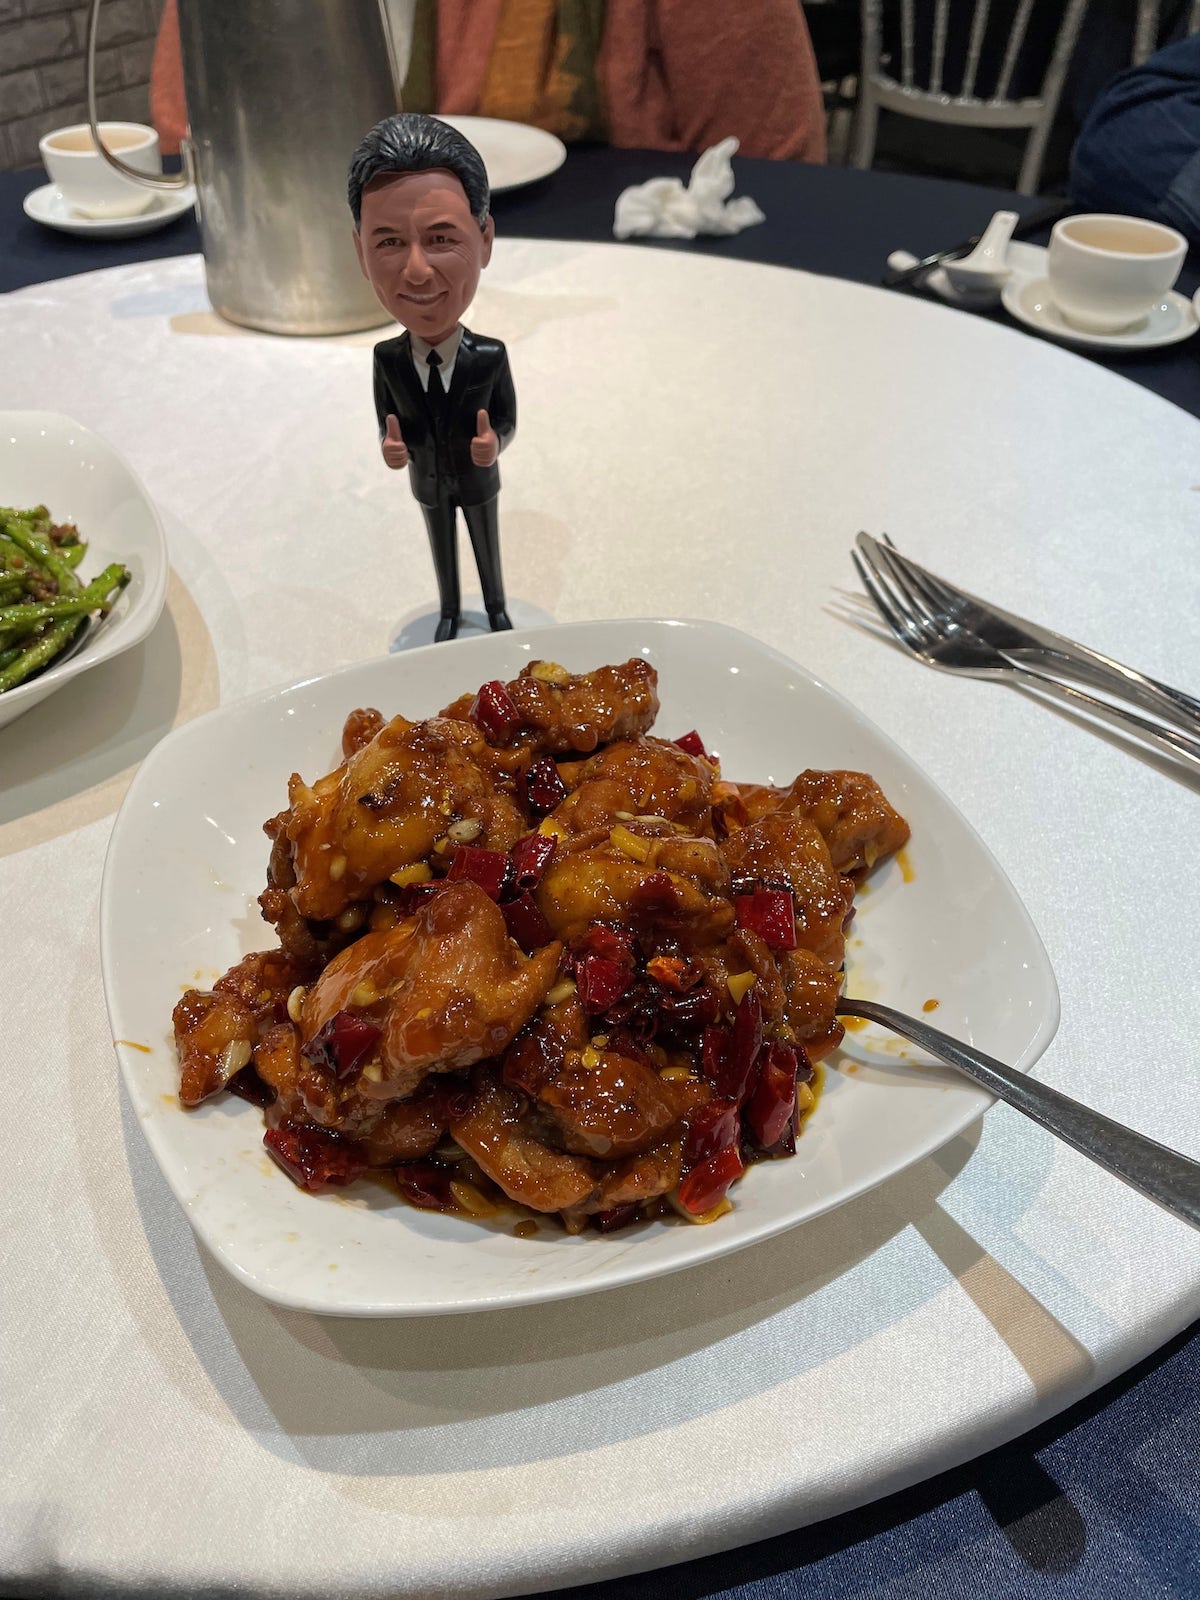 Little Jimmy in Taipei, Taiwan at Peng’s Gourmet restaurant where they invented General Tso’s chicken dish